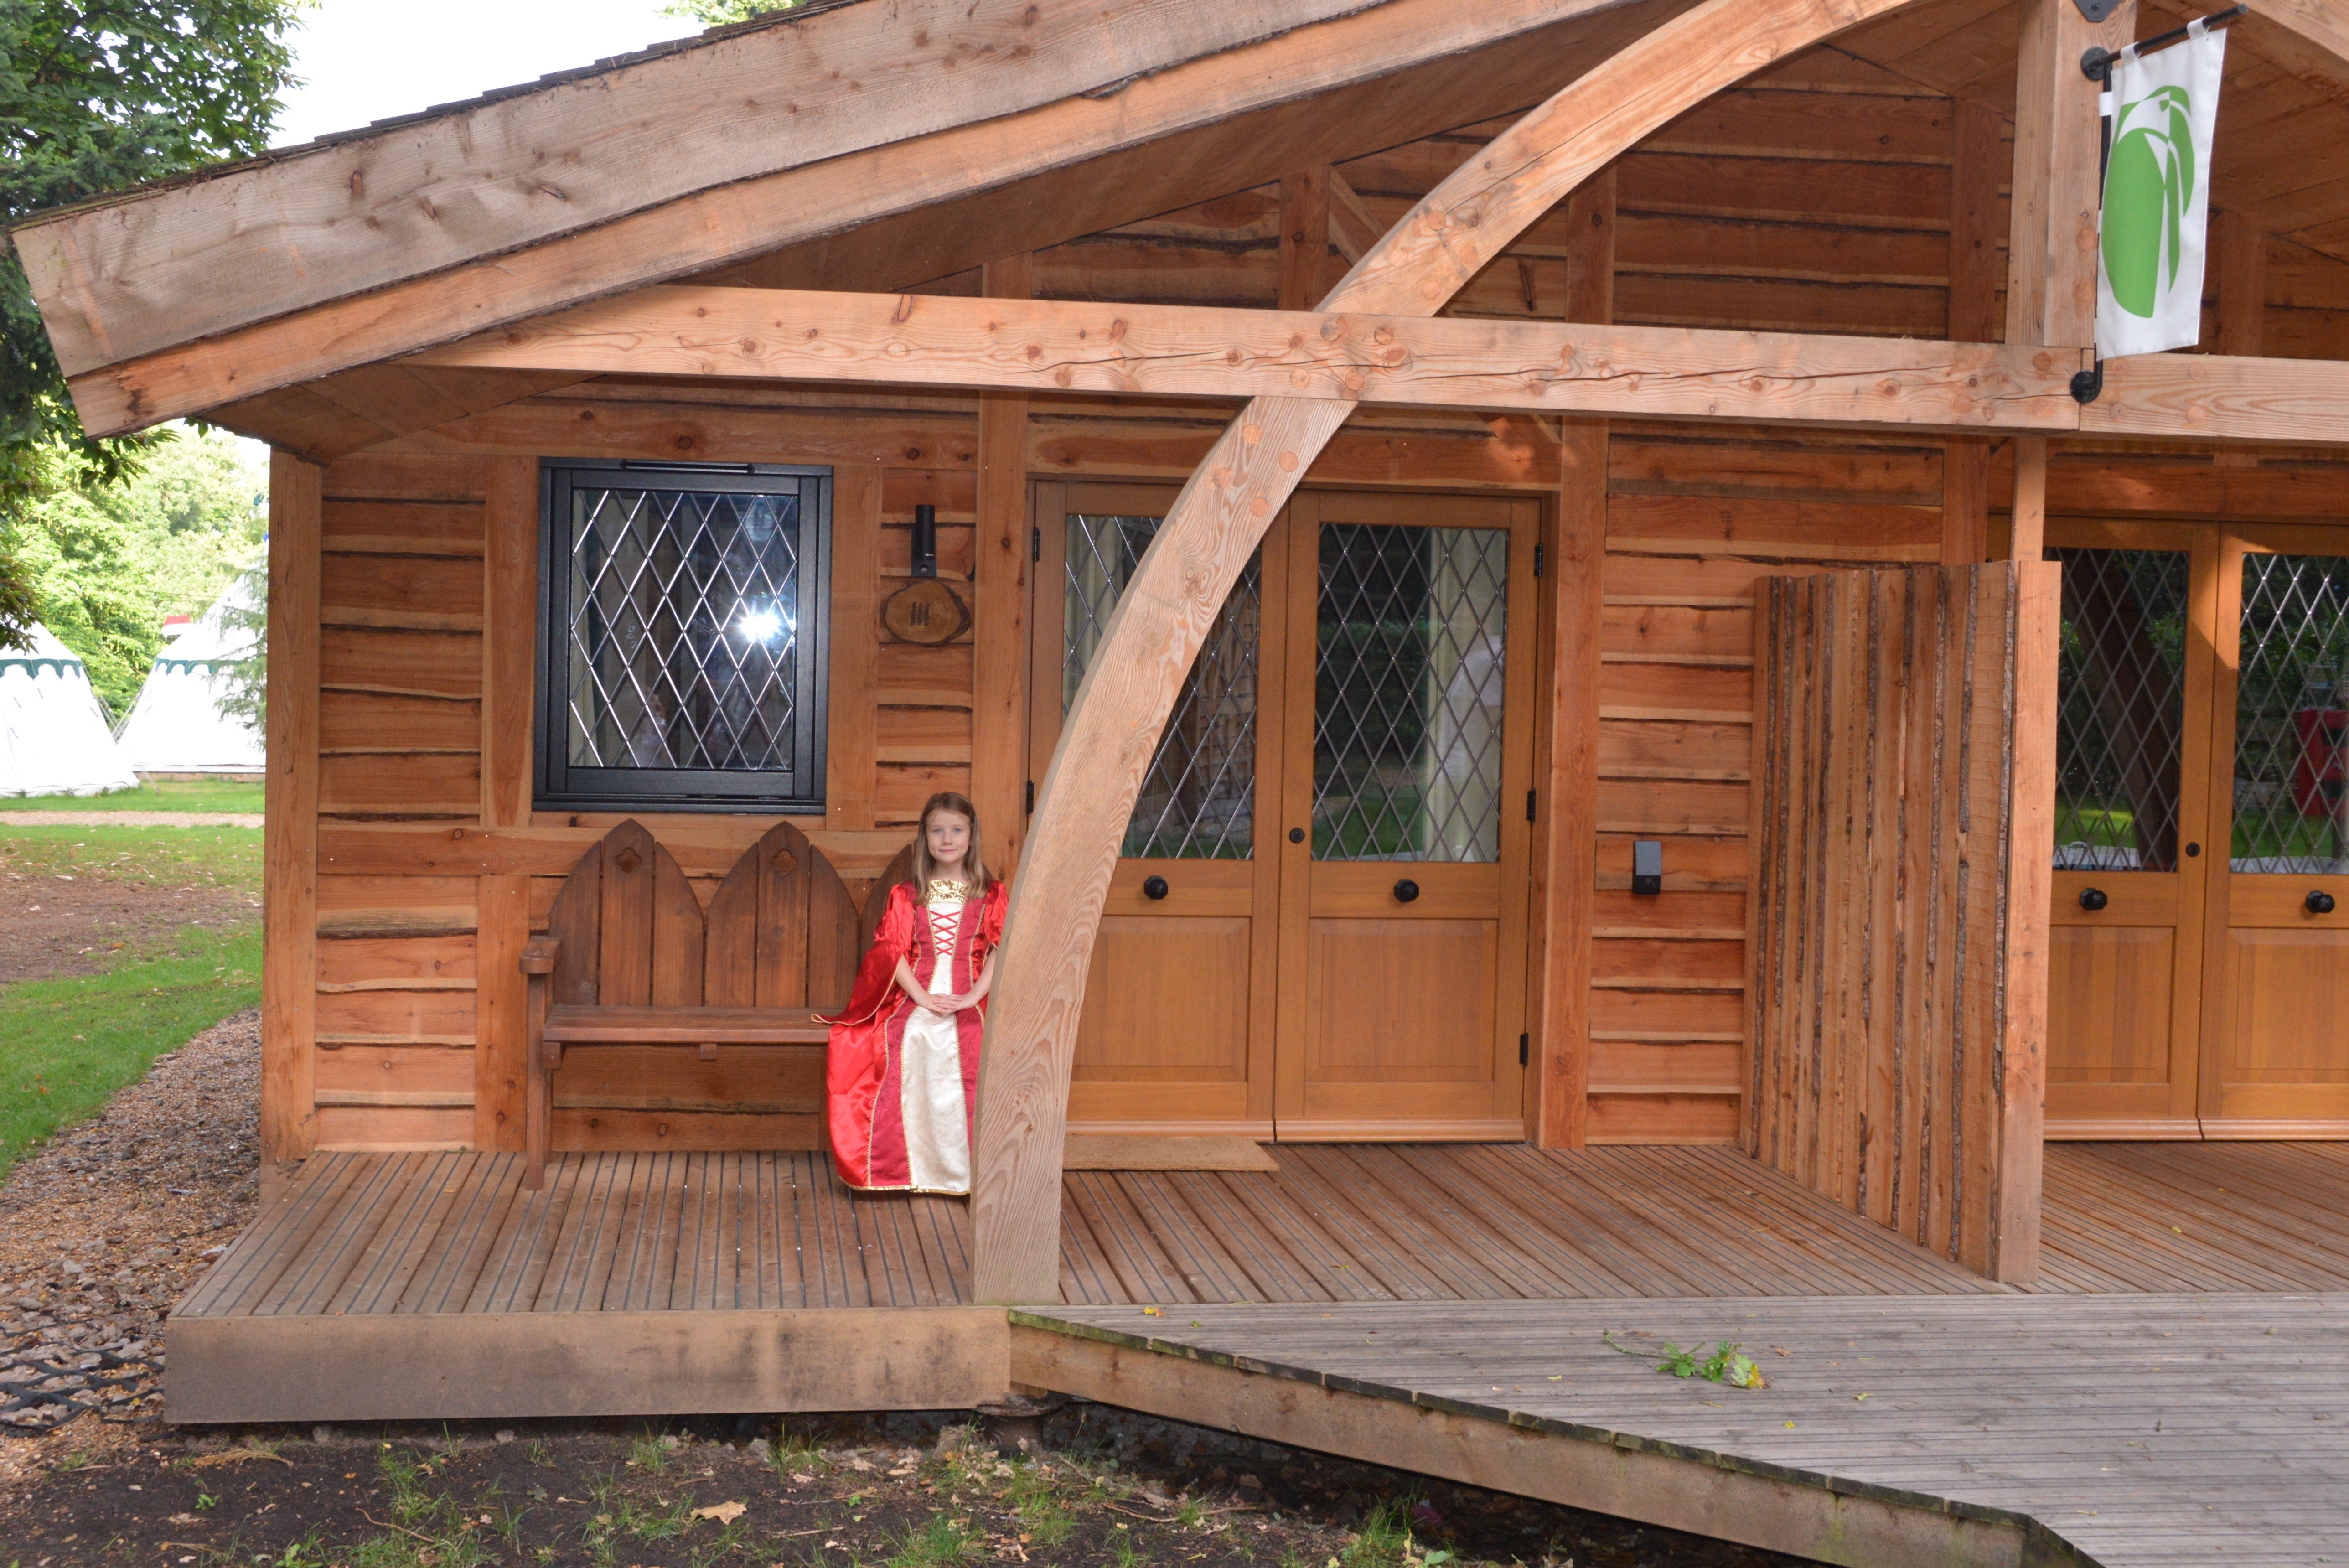 Woodland Lodges sleep up to five in two bedrooms on one floor while a  Knight’s Lodges sleep up to seven across two storeys, including a mezzanine level with master bedroom.